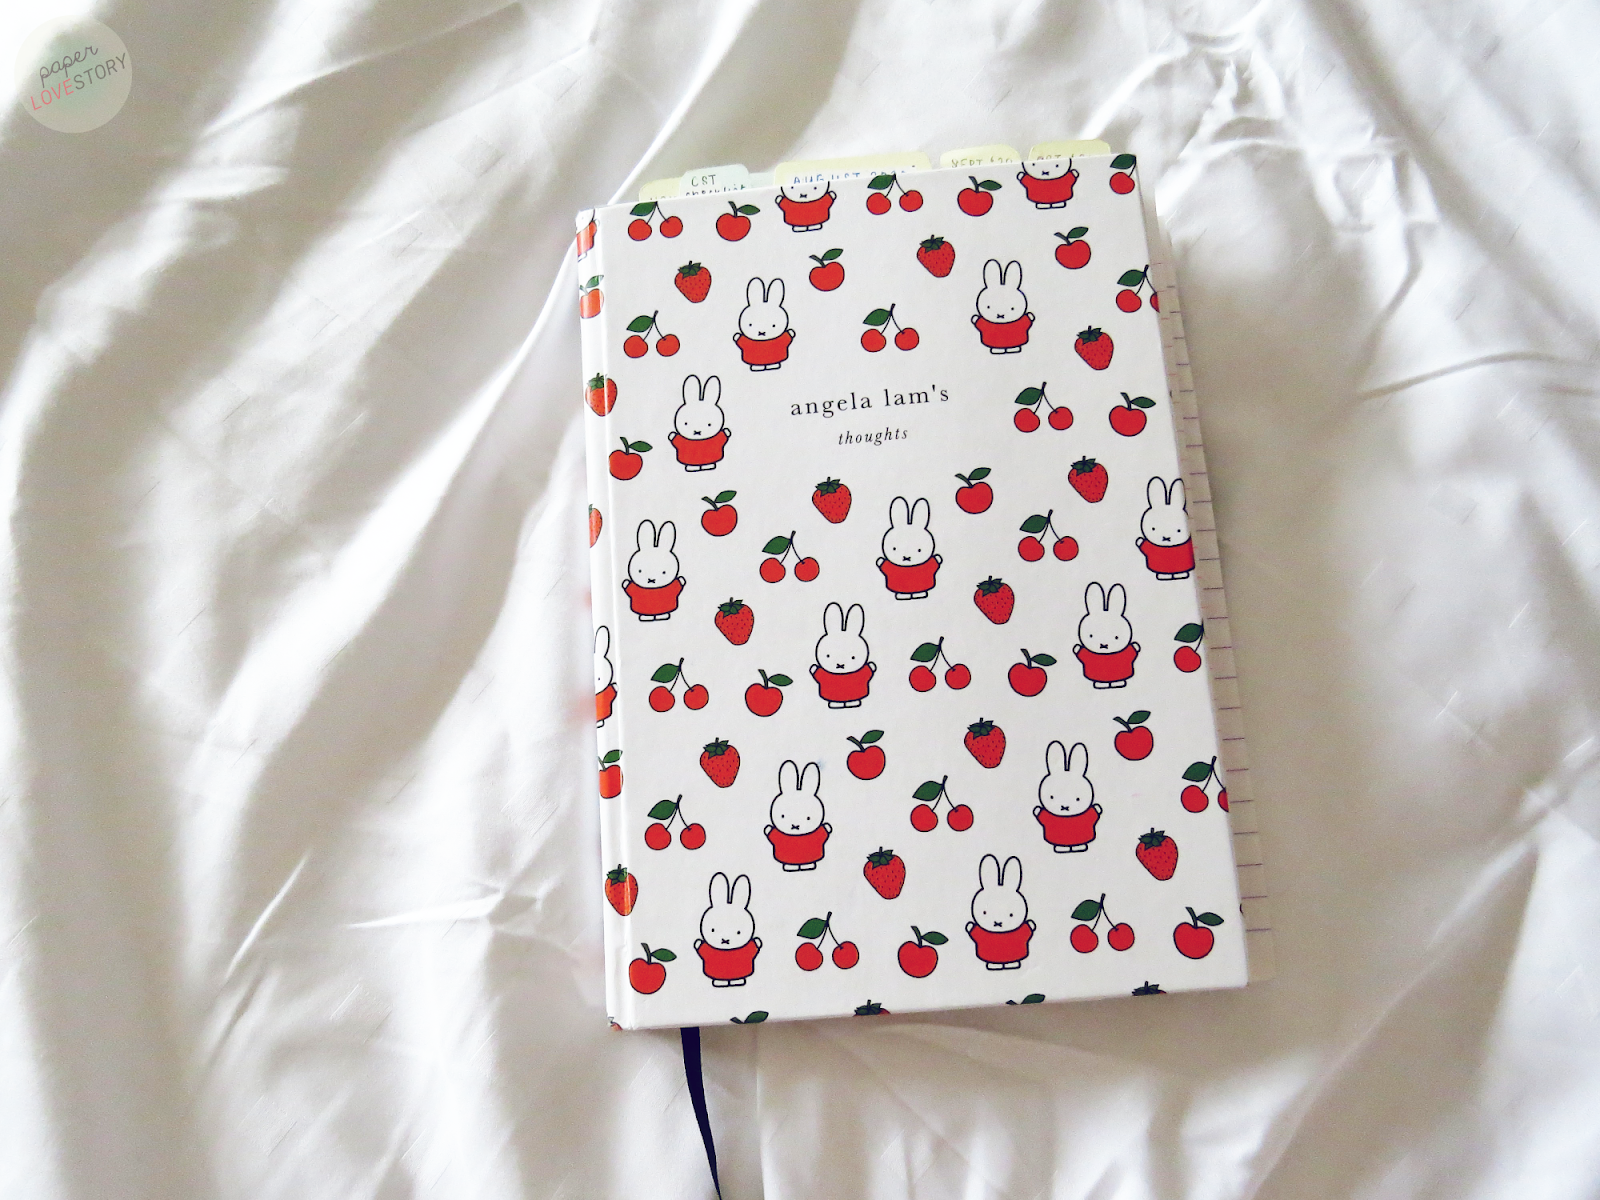 Paper Lovestory { a lifestyle blog from a university student about  stationery and organisation }: midori A5 cover to cover notebook